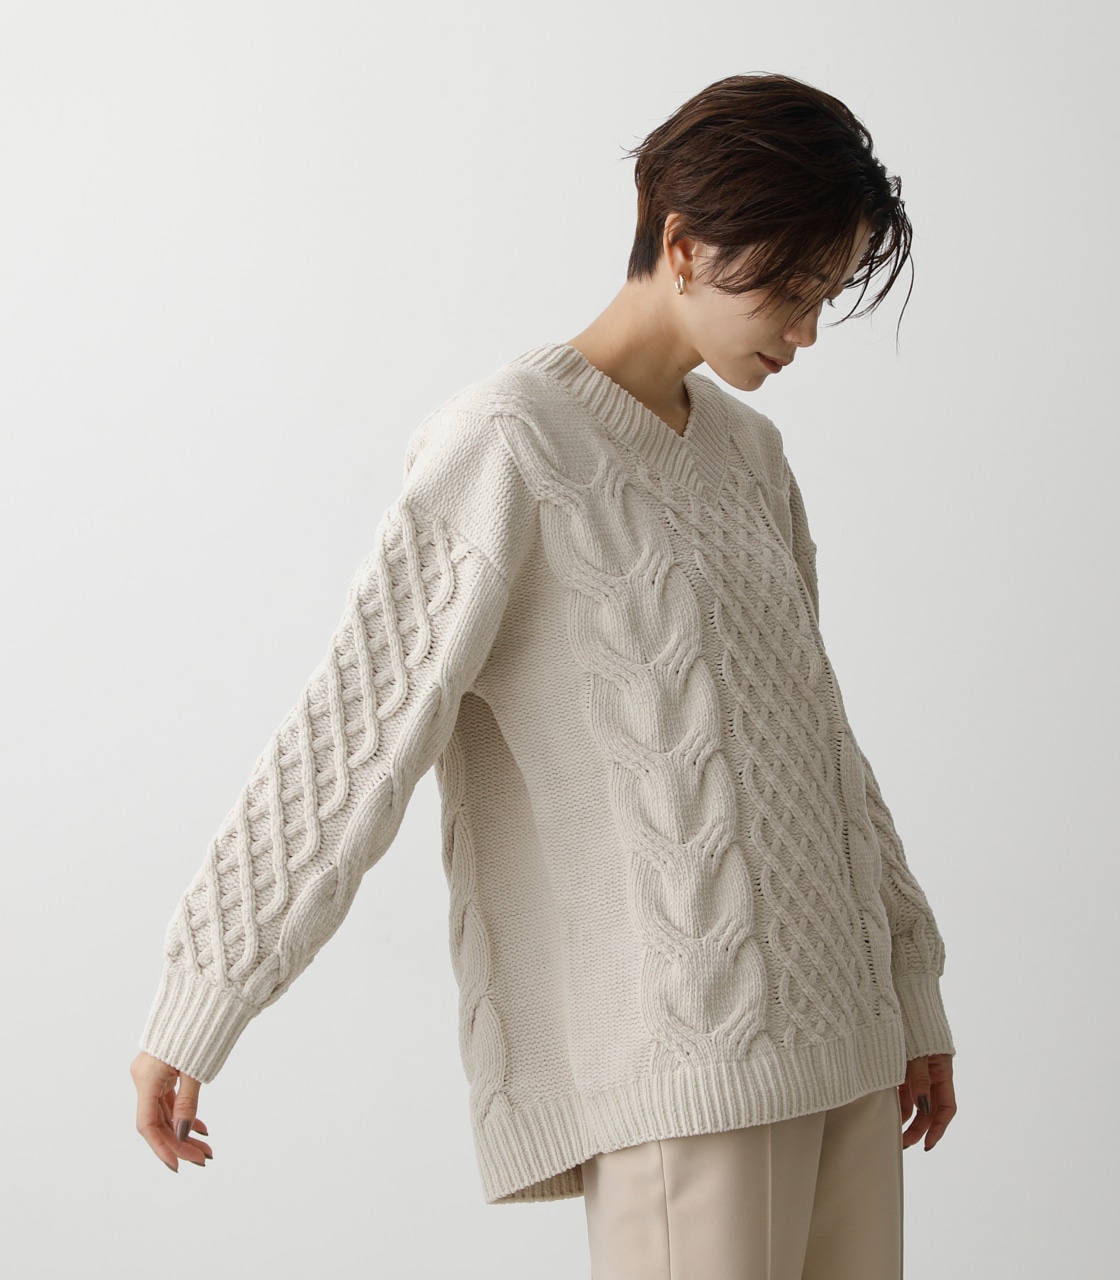 CHENILLE CABLE V/N KNIT TOPS/シェニールケーブルVネックニットトップス 詳細画像 IVOY 2